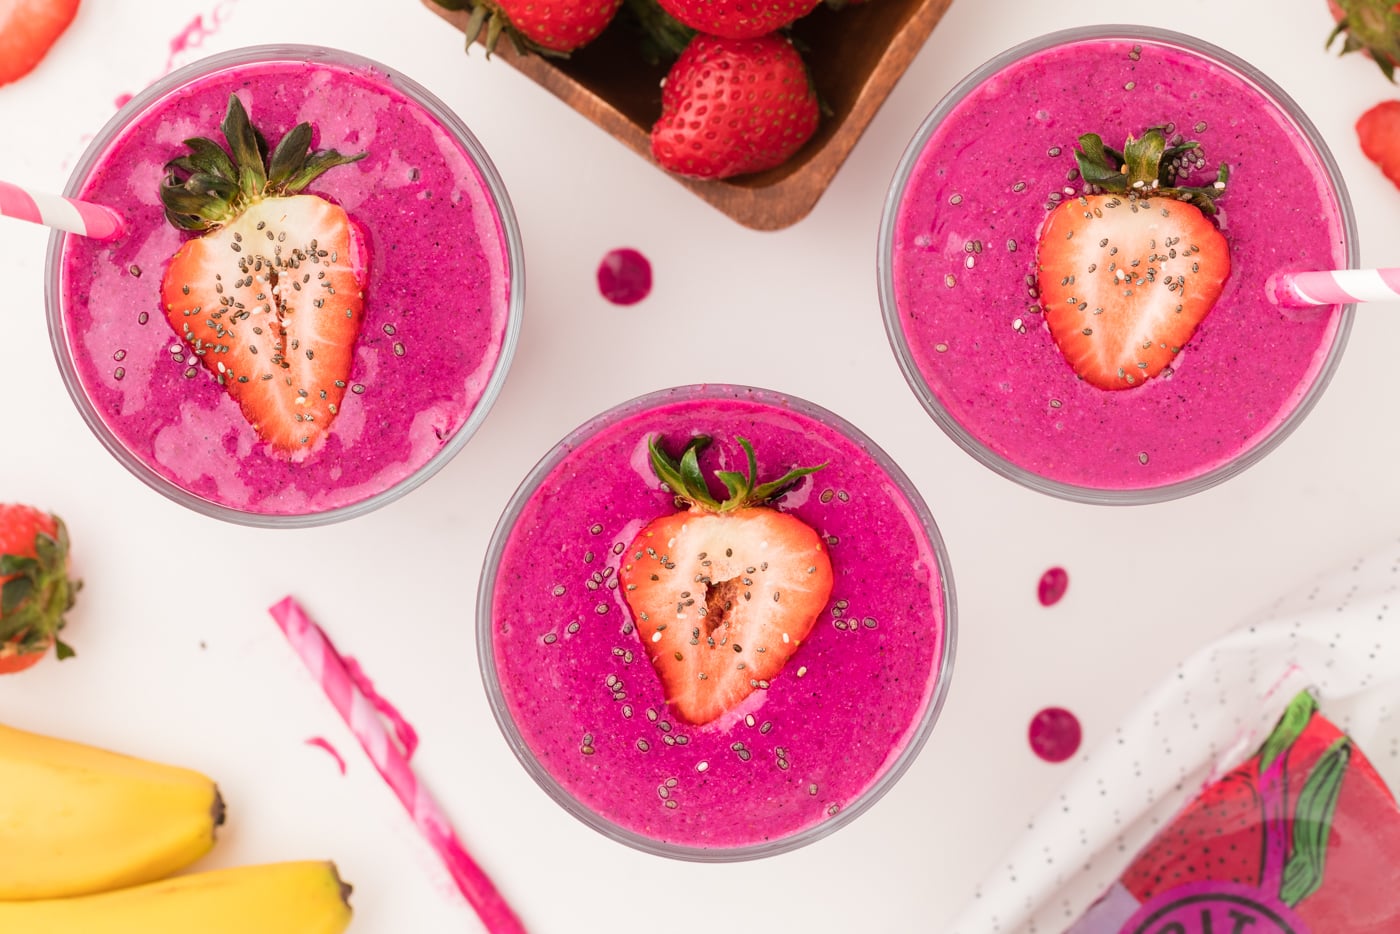 https://www.cleaneatingkitchen.com/wp-content/uploads/2020/05/Dragon-Fruit-Smoothie-4437.jpg